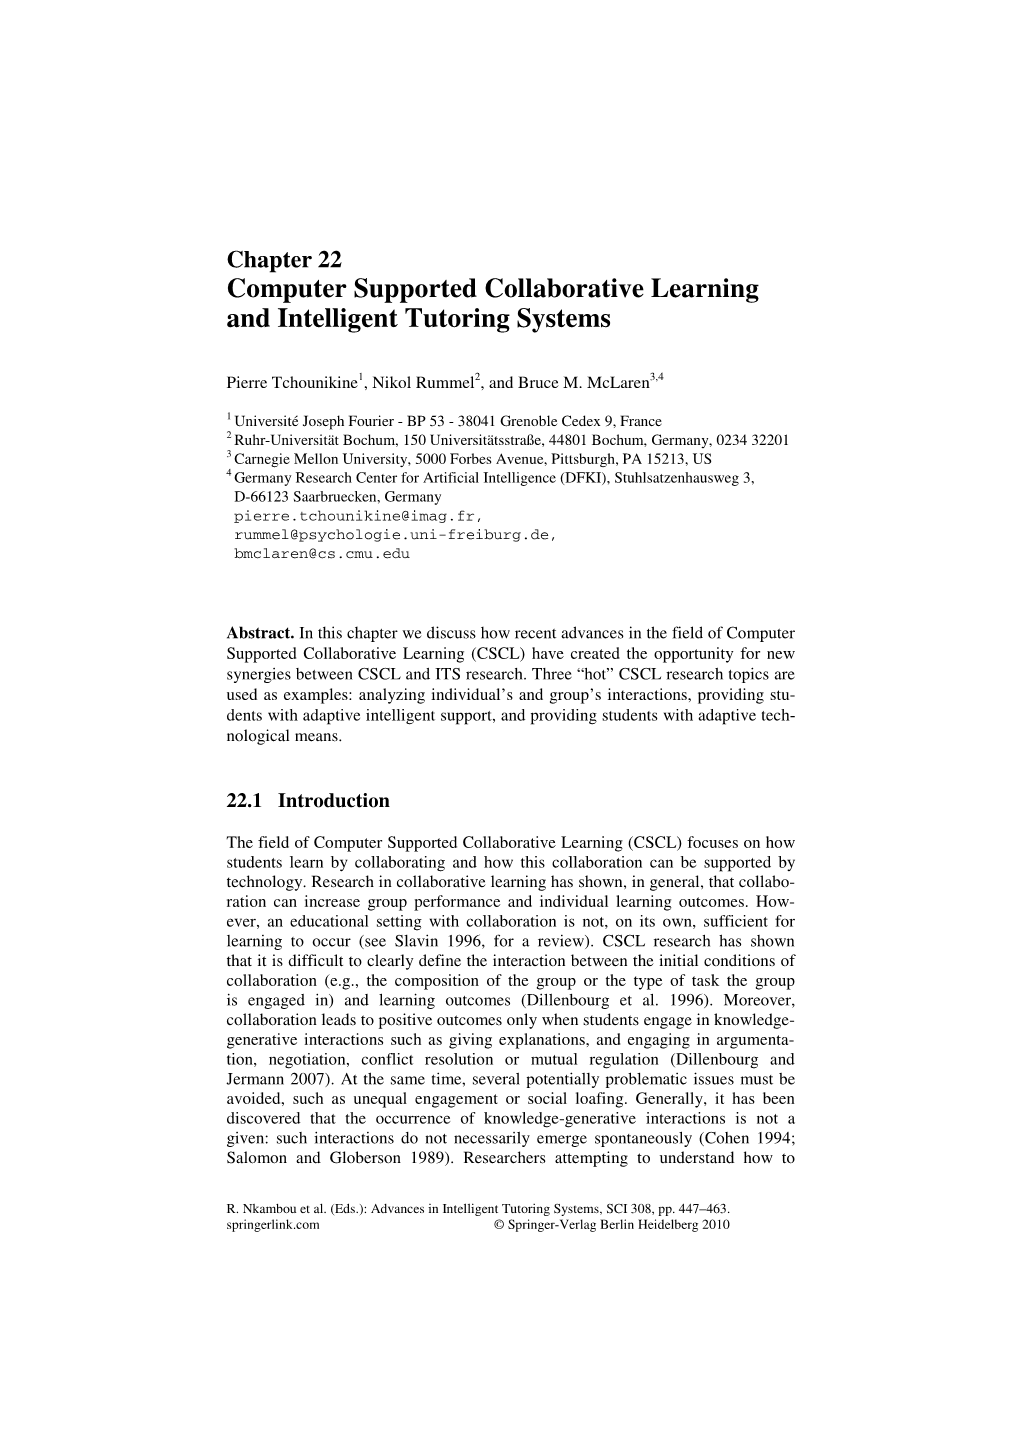 Computer Supported Collaborative Learning and Intelligent Tutoring Systems